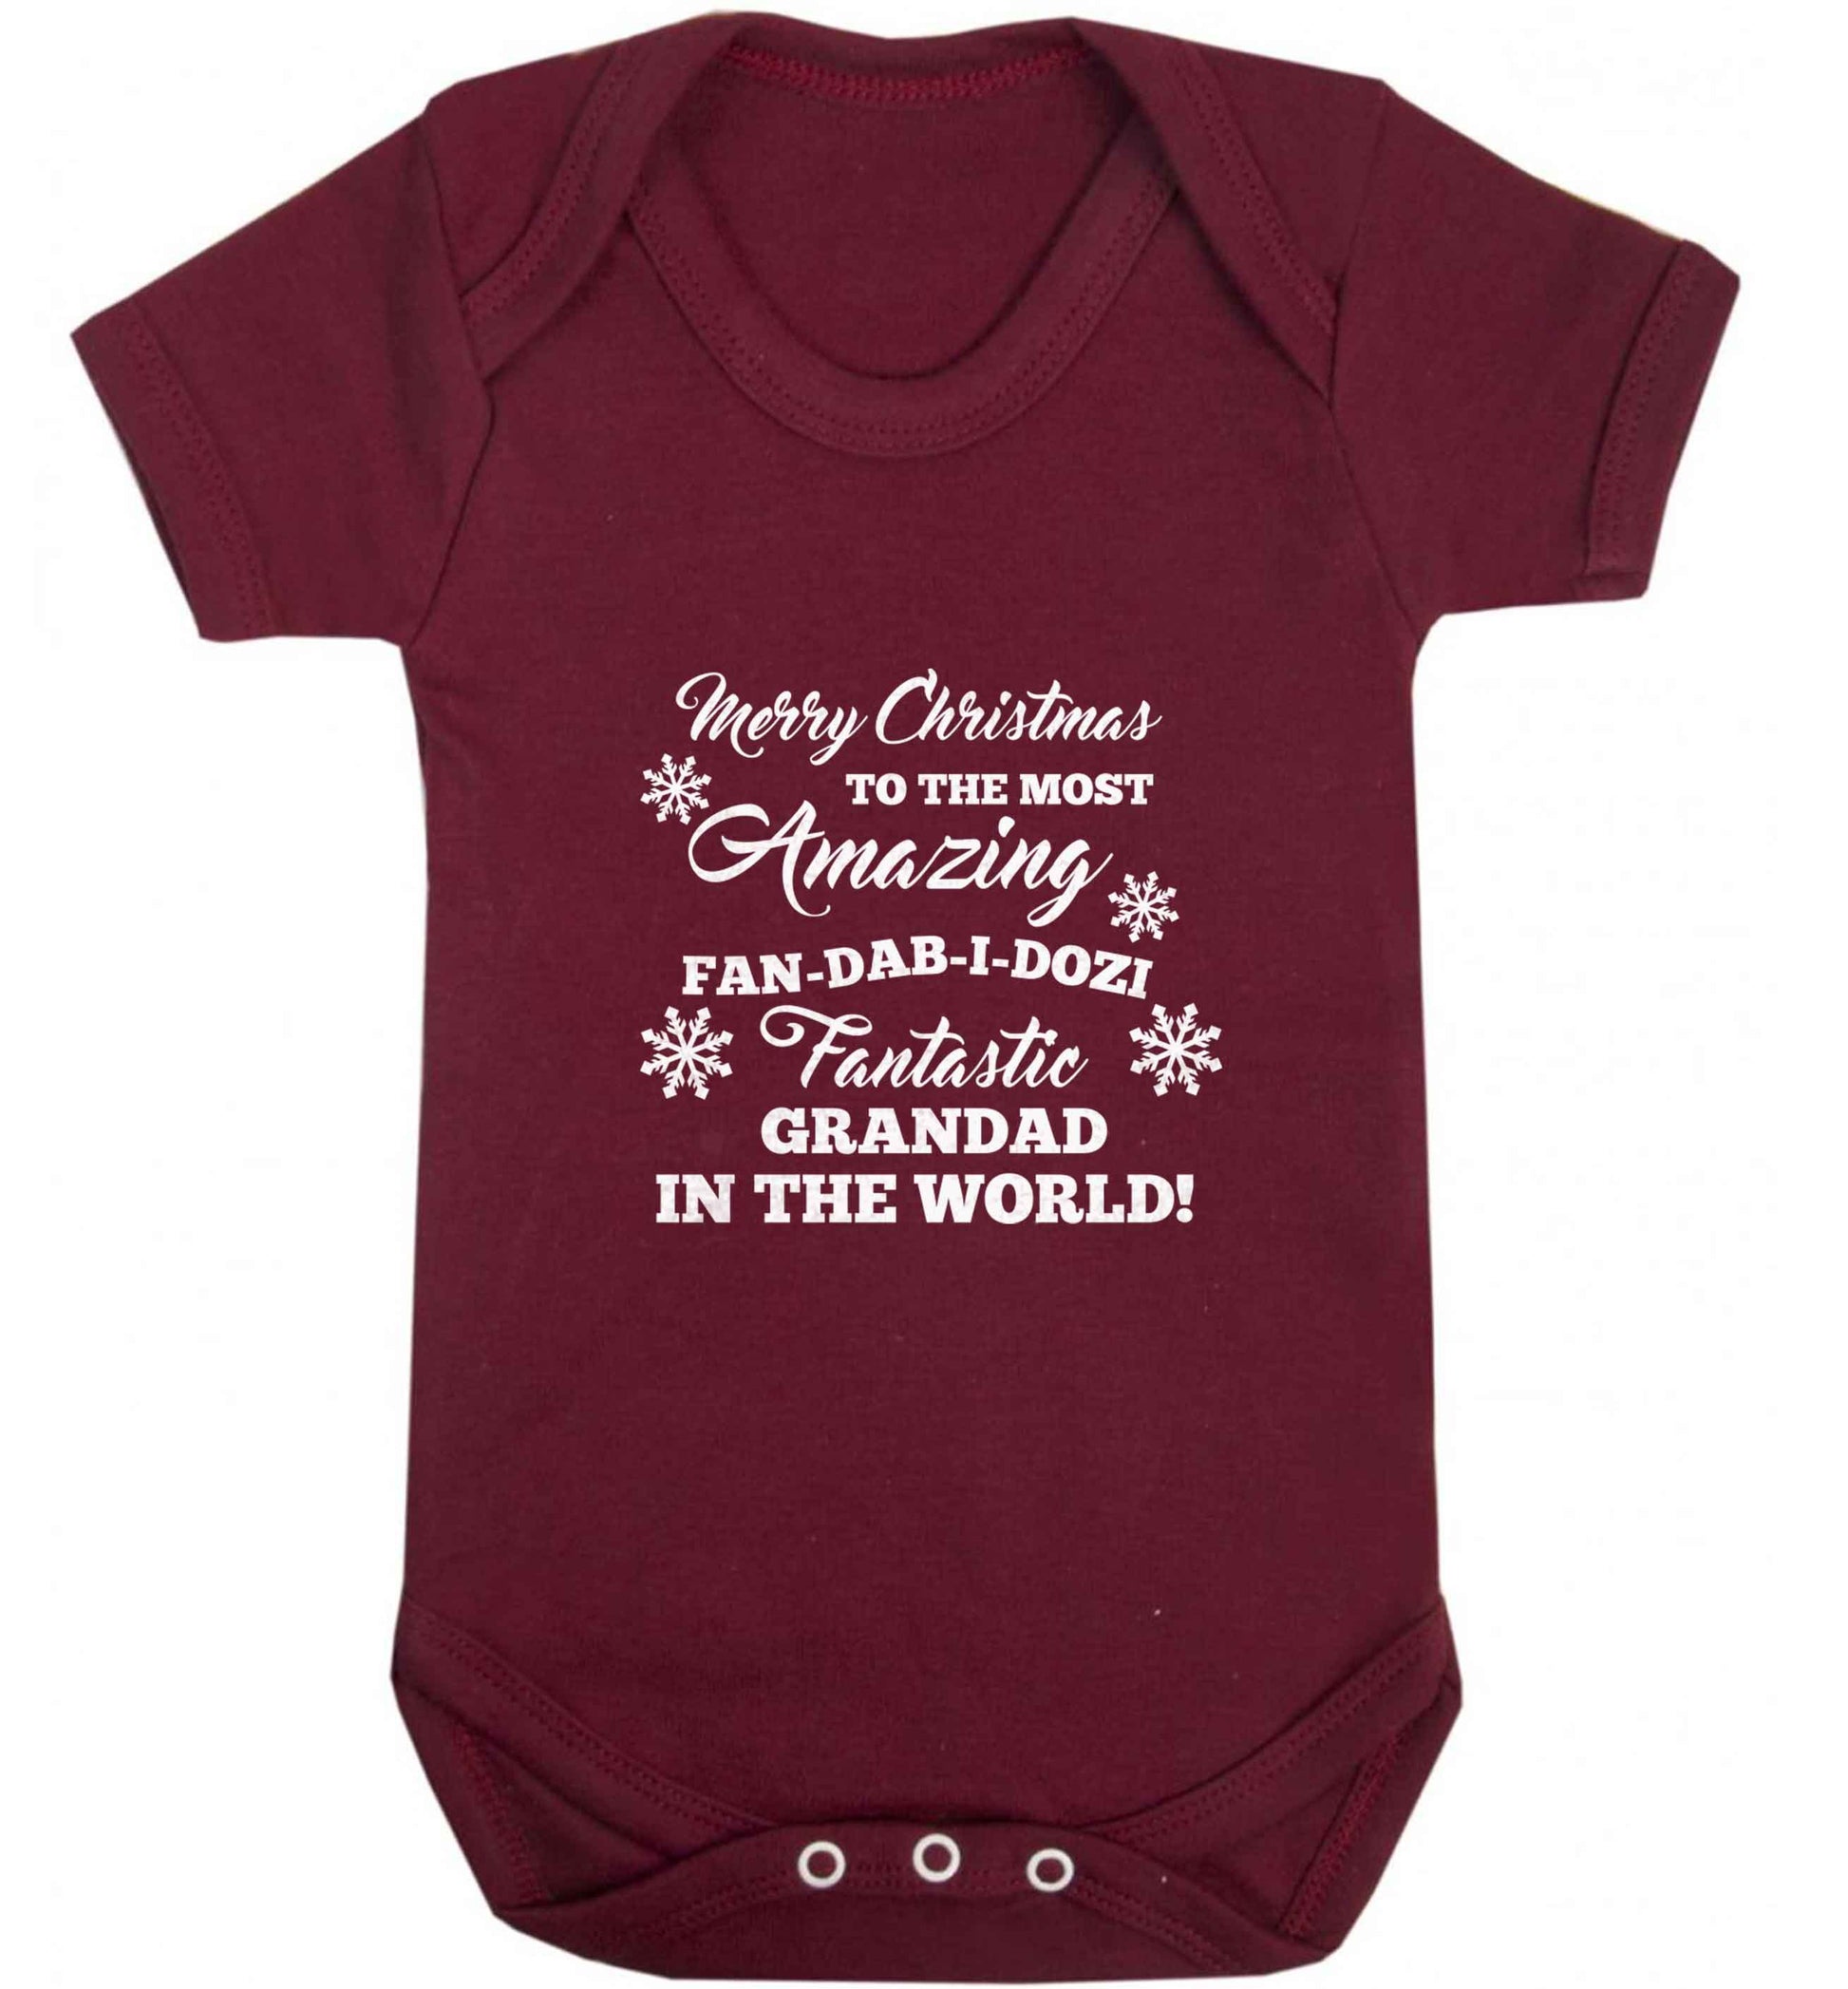 Merry Christmas to the most amazing fan-dab-i-dozi fantasic Grandad in the world baby vest maroon 18-24 months